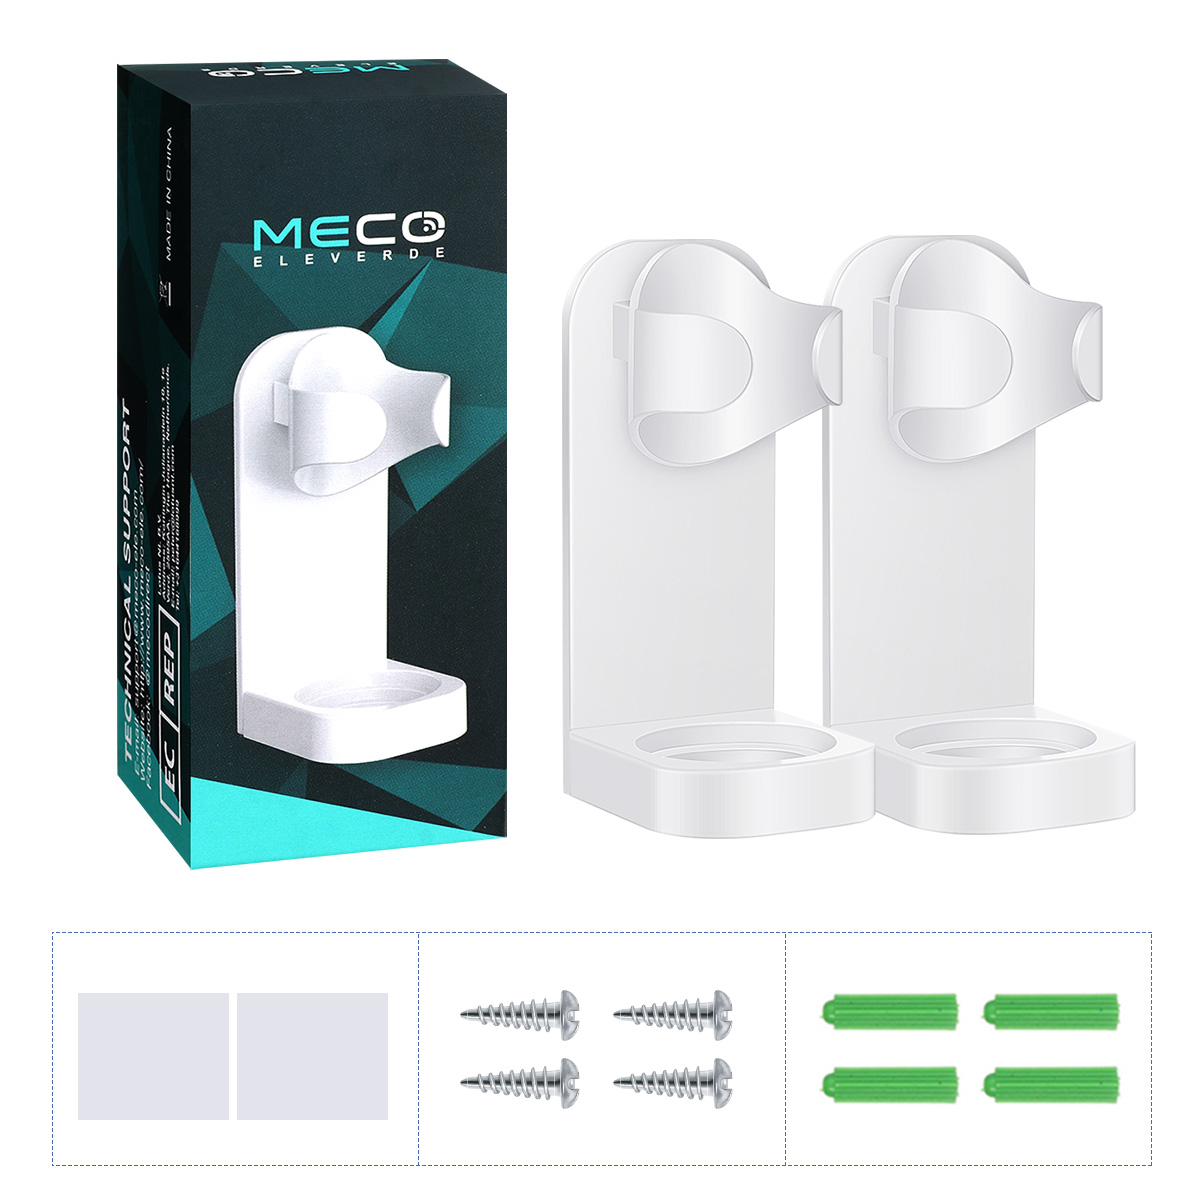 MECO-ELEVERDE-2Pcs-Creative-Traceless-Stand-Rack-Toothbrush-Organizer-Electric-Toothbrush-Wall-Mount-1810364-1